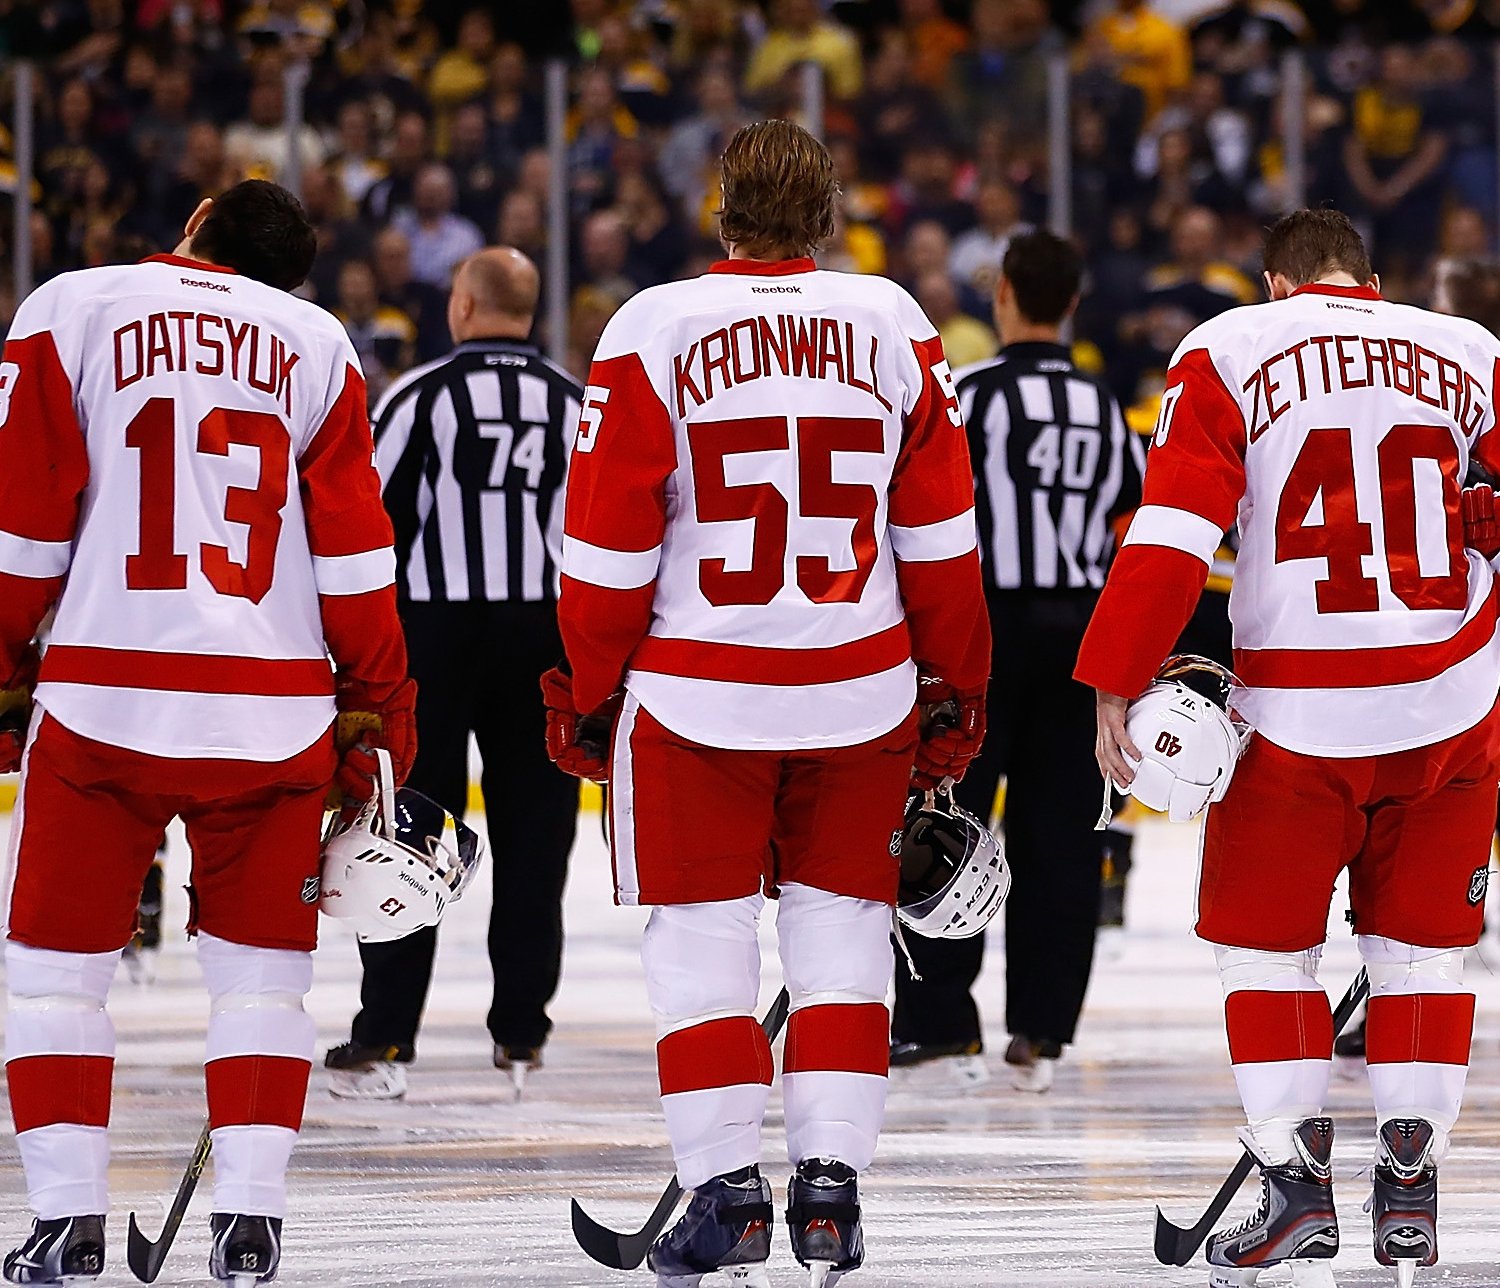 Ranking the 5 Most Important Players on the Detroit Red Wings Roster